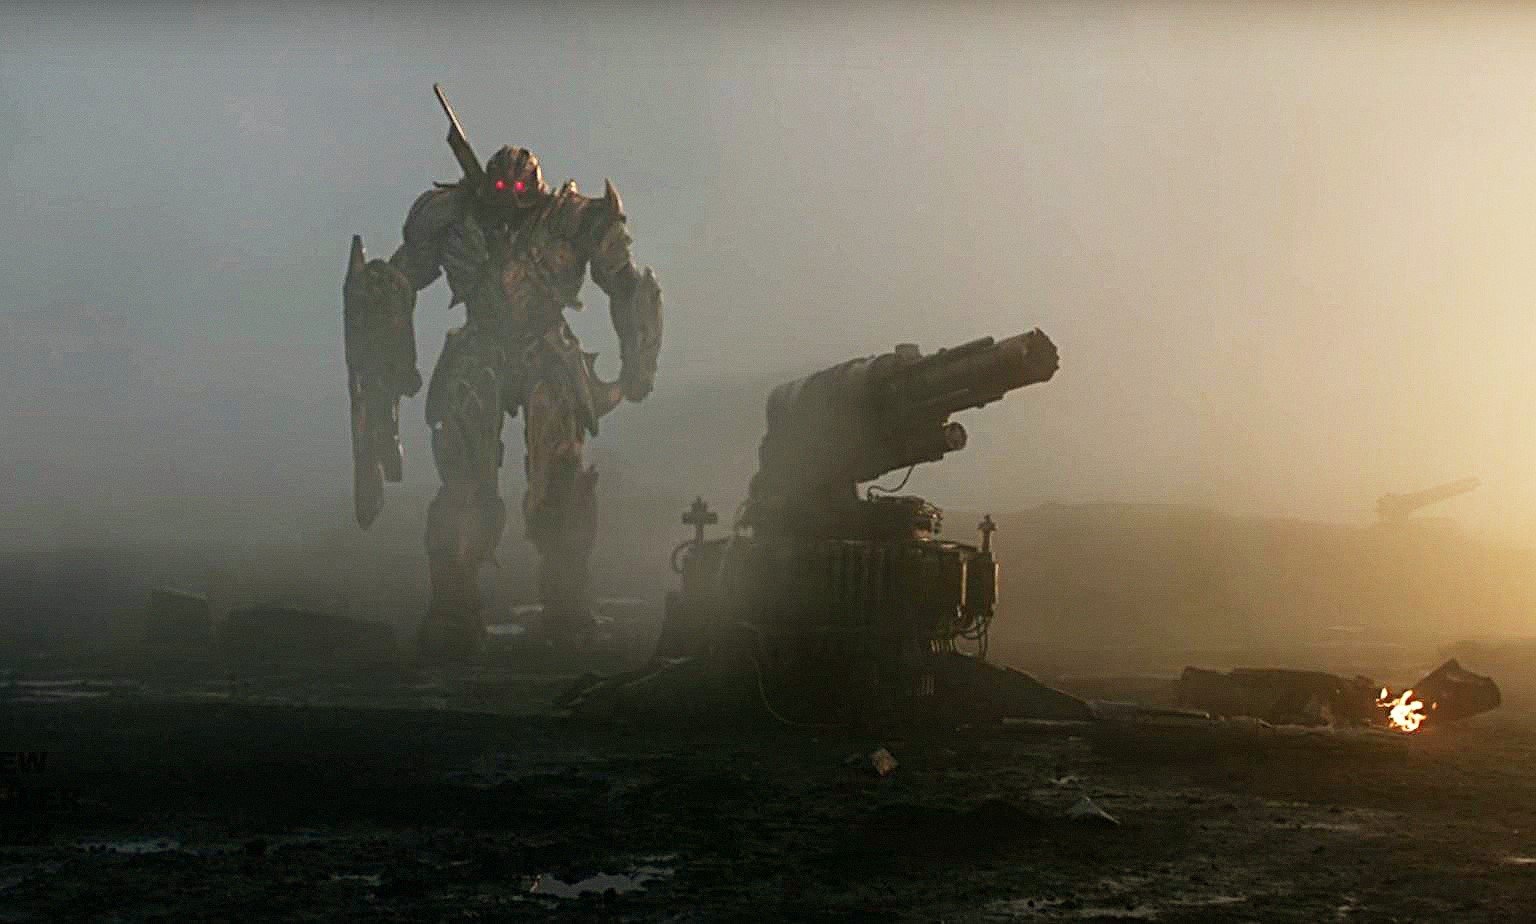 Megatron from Paramount Pictures' Transformers: The Last Knight (2017)